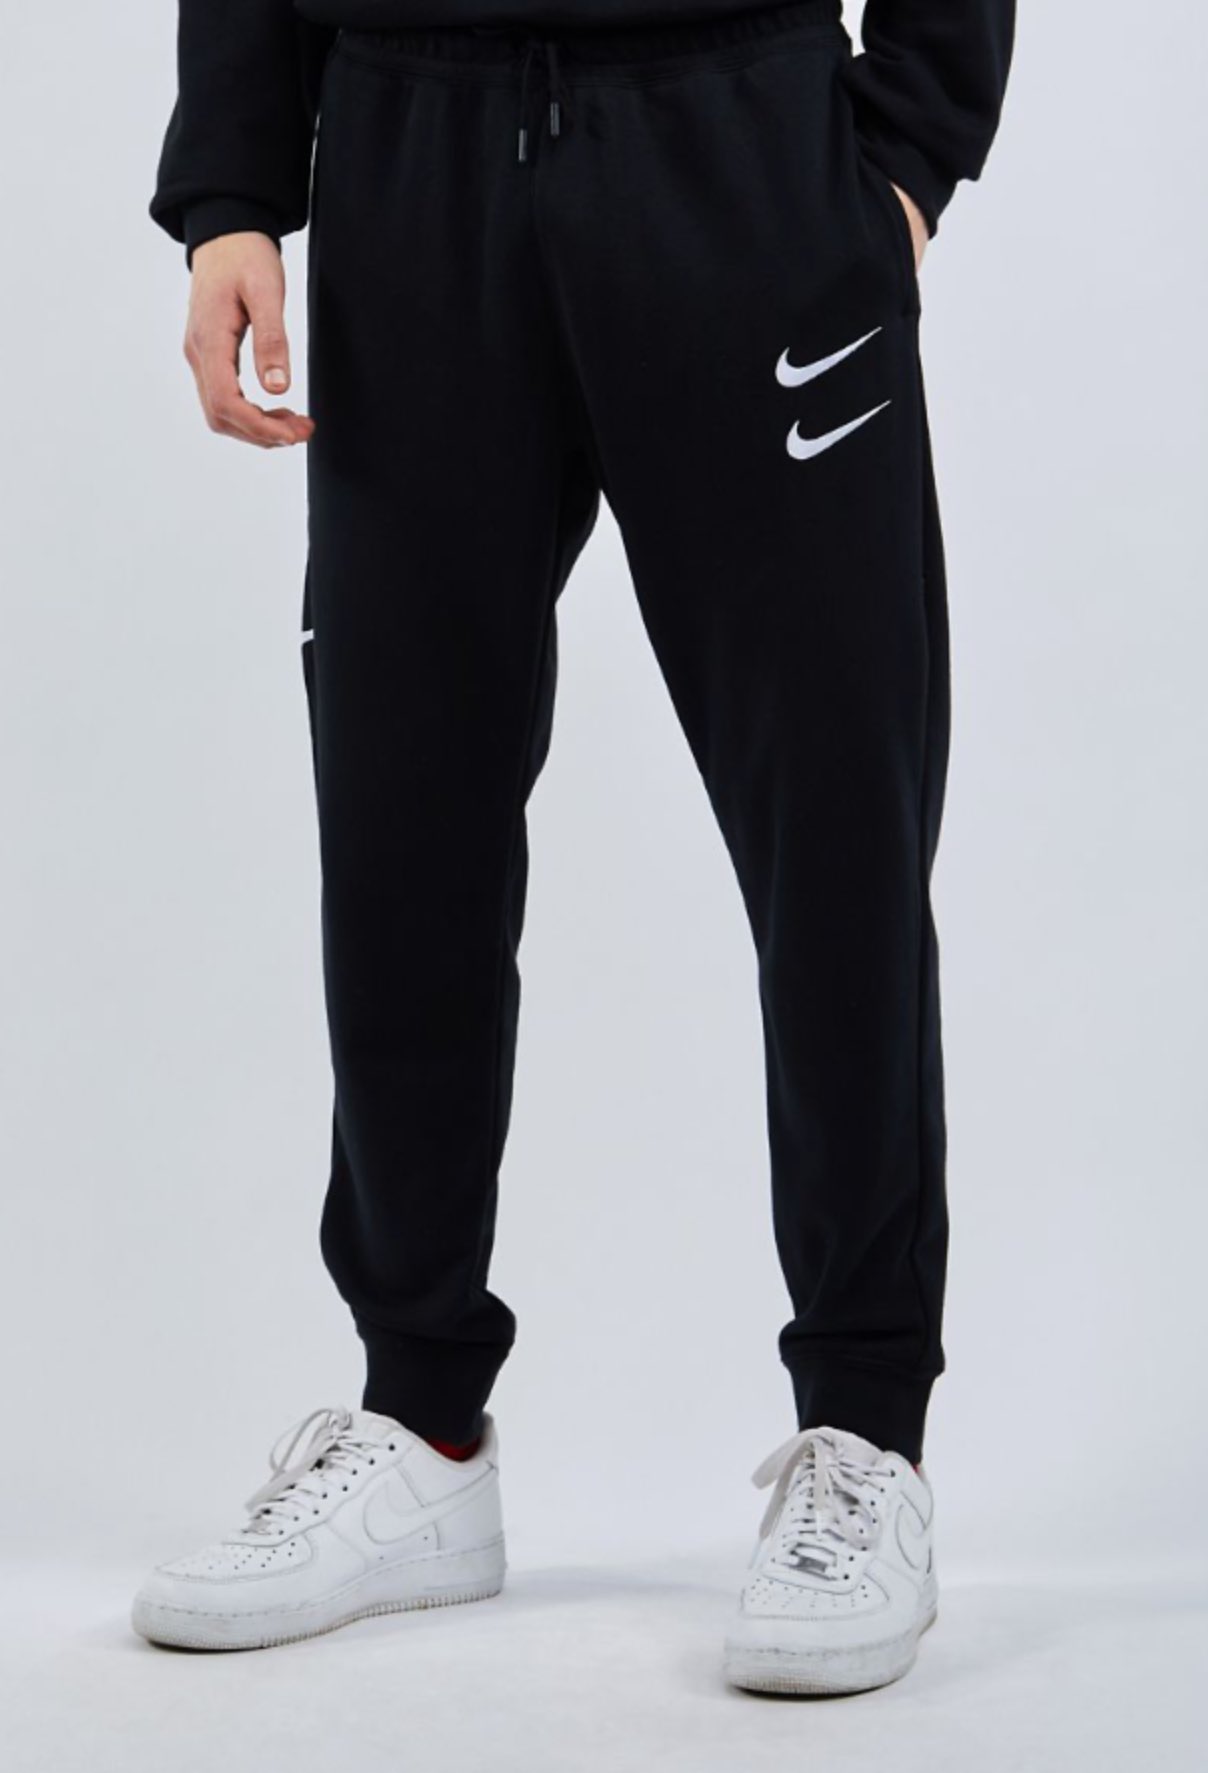 cicatriz Rango Político Clothing Deals GB on Twitter: "Ad: And the Nike 'Double Swoosh' Track Pants  have reduced from £54.99 to ONLY £26.24! Code “STAYHOME25” here =&gt;  https://t.co/VkqL4cxOLE XS/M/L/XL https://t.co/JEkSPhAFbn" / Twitter